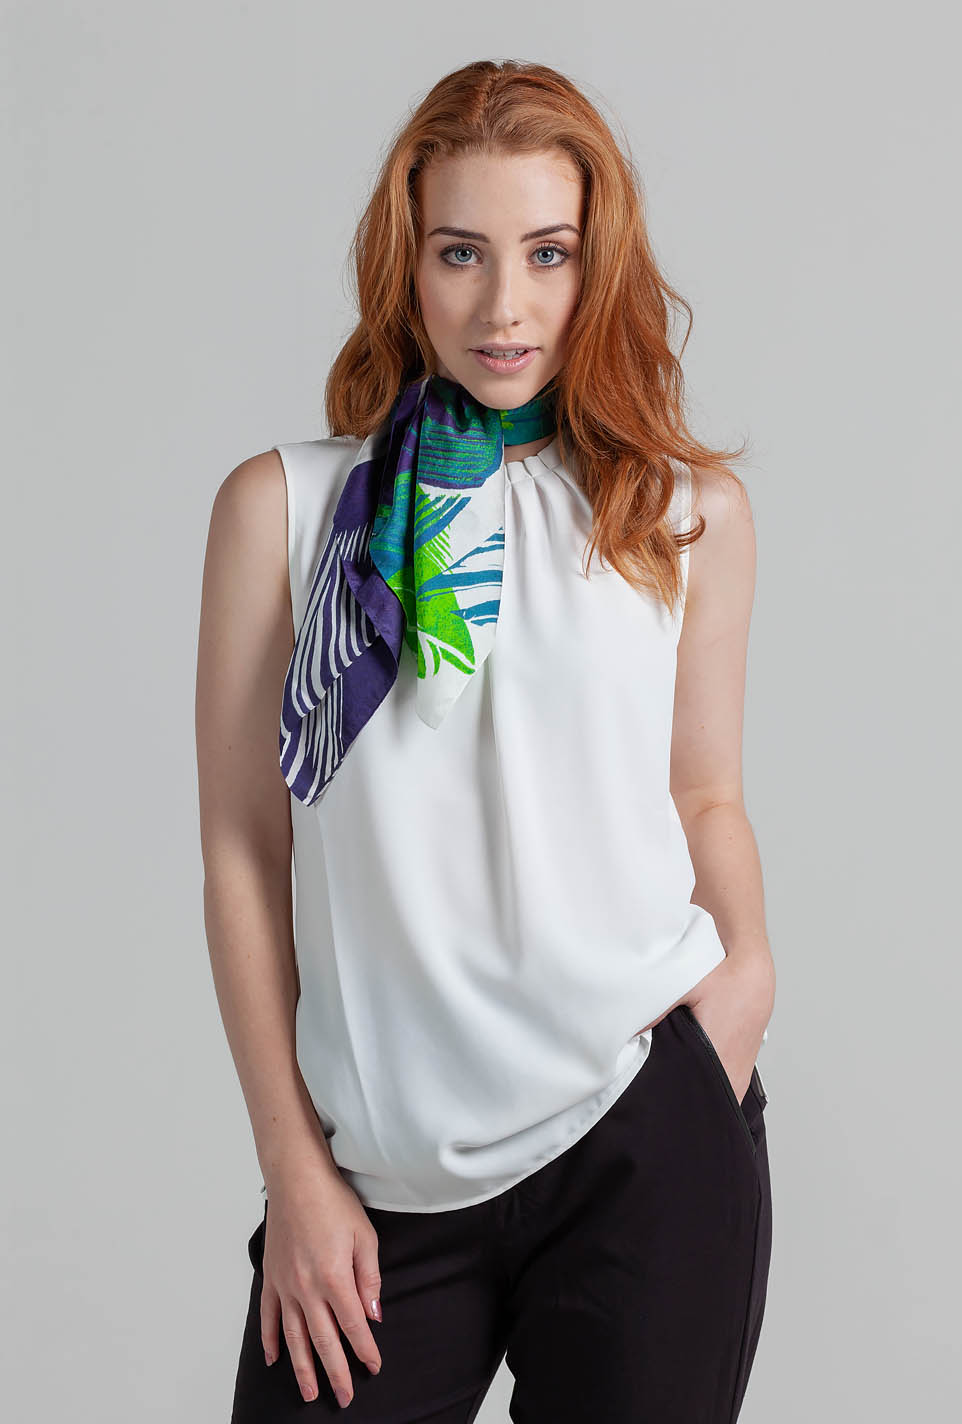 Buy Garden Lady Silk Scarf online Australia - LILA AND ME – Lila and Me